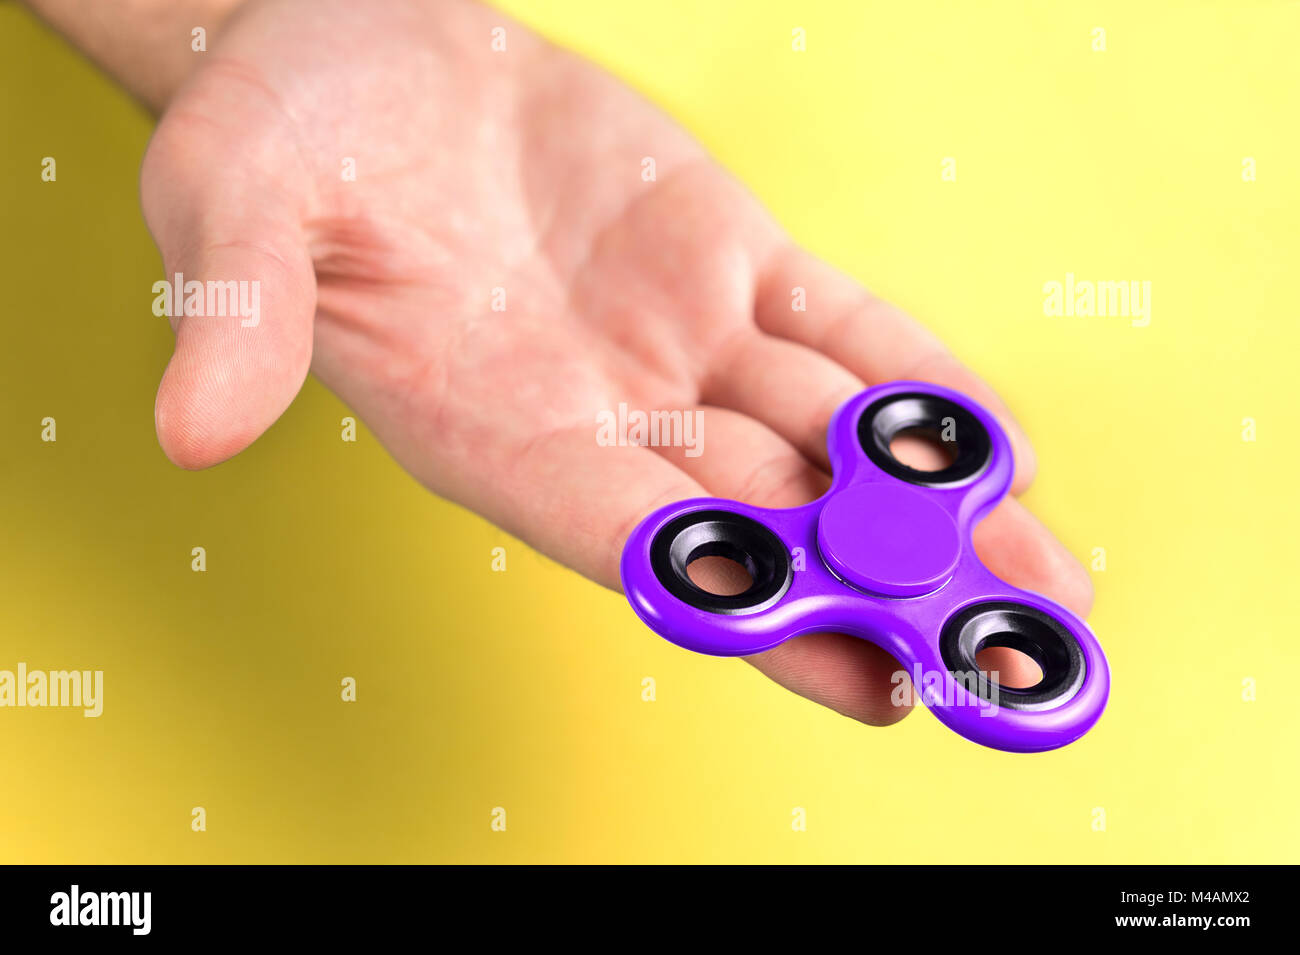 Purple and violet fidget spinner on hand, palm and fingers against yellow background. Stock Photo